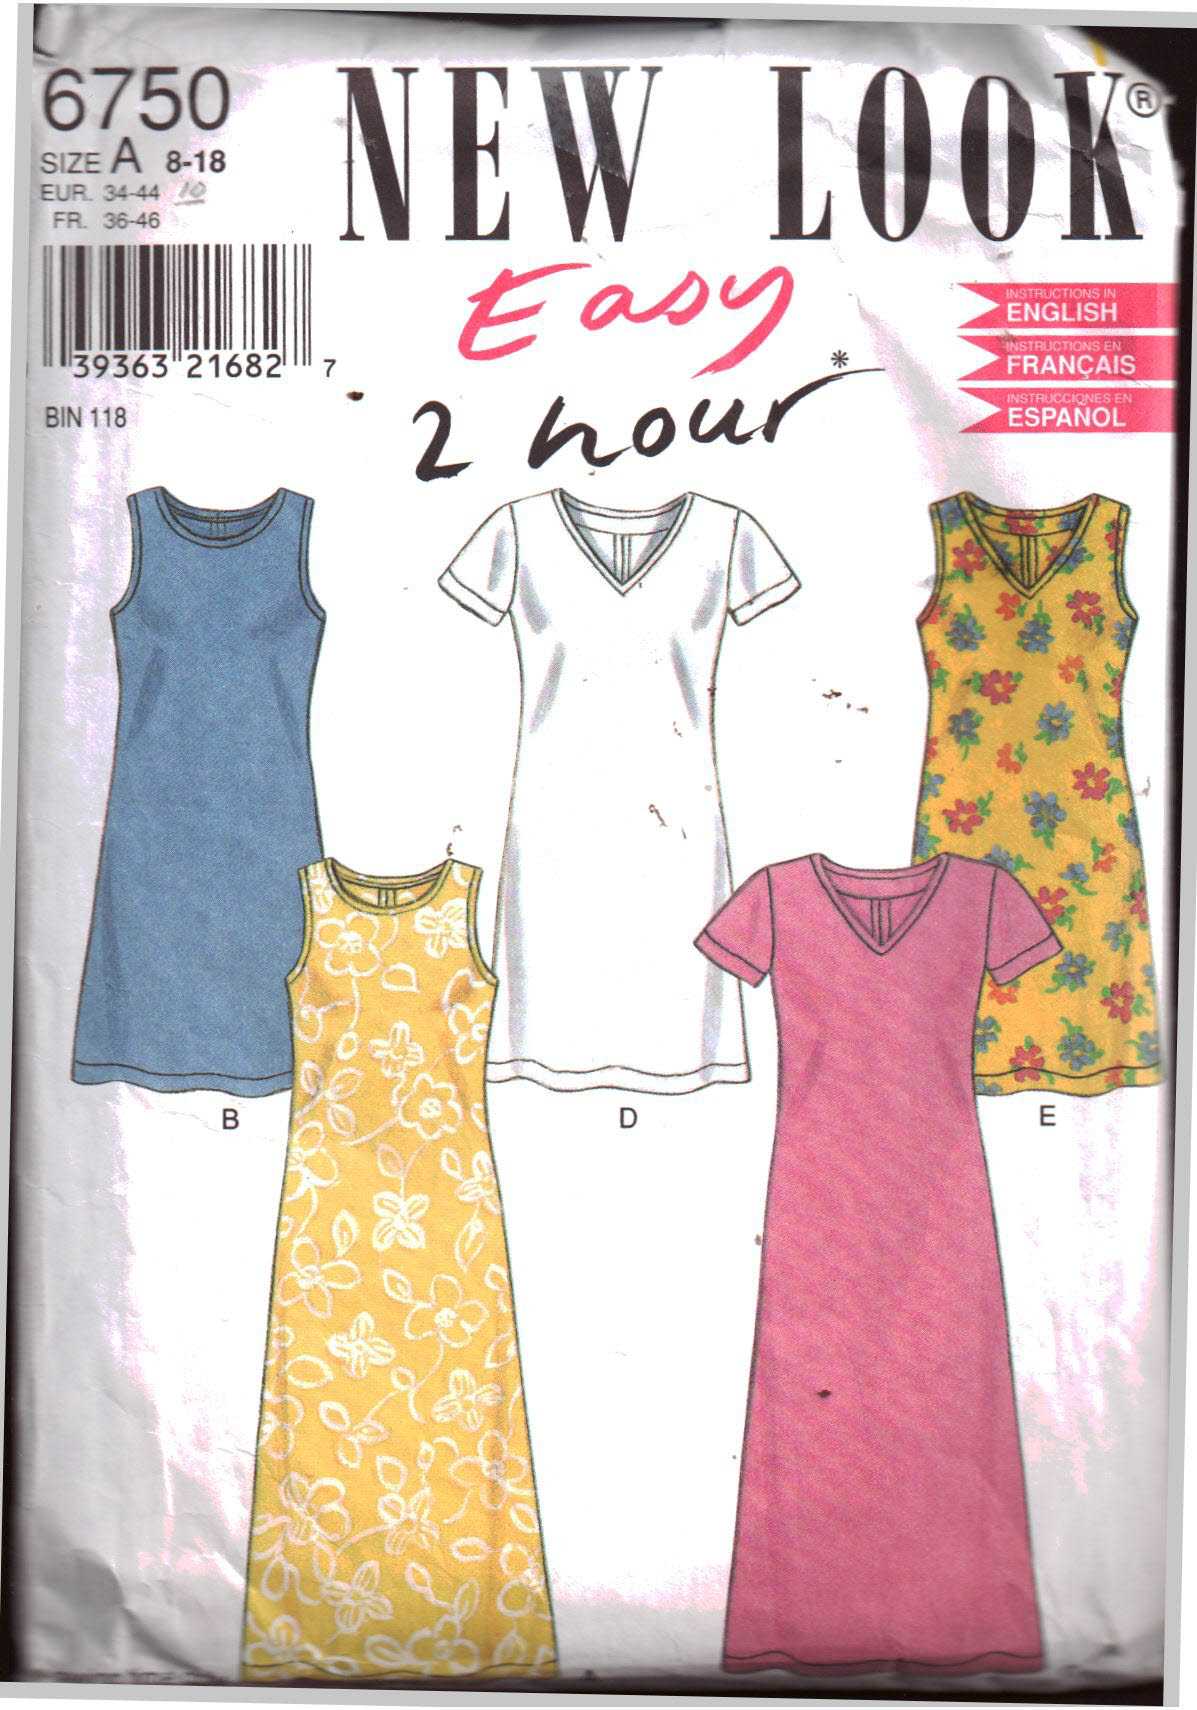 New Look 6750 Dress Size: A 8-18 Used Sewing Pattern